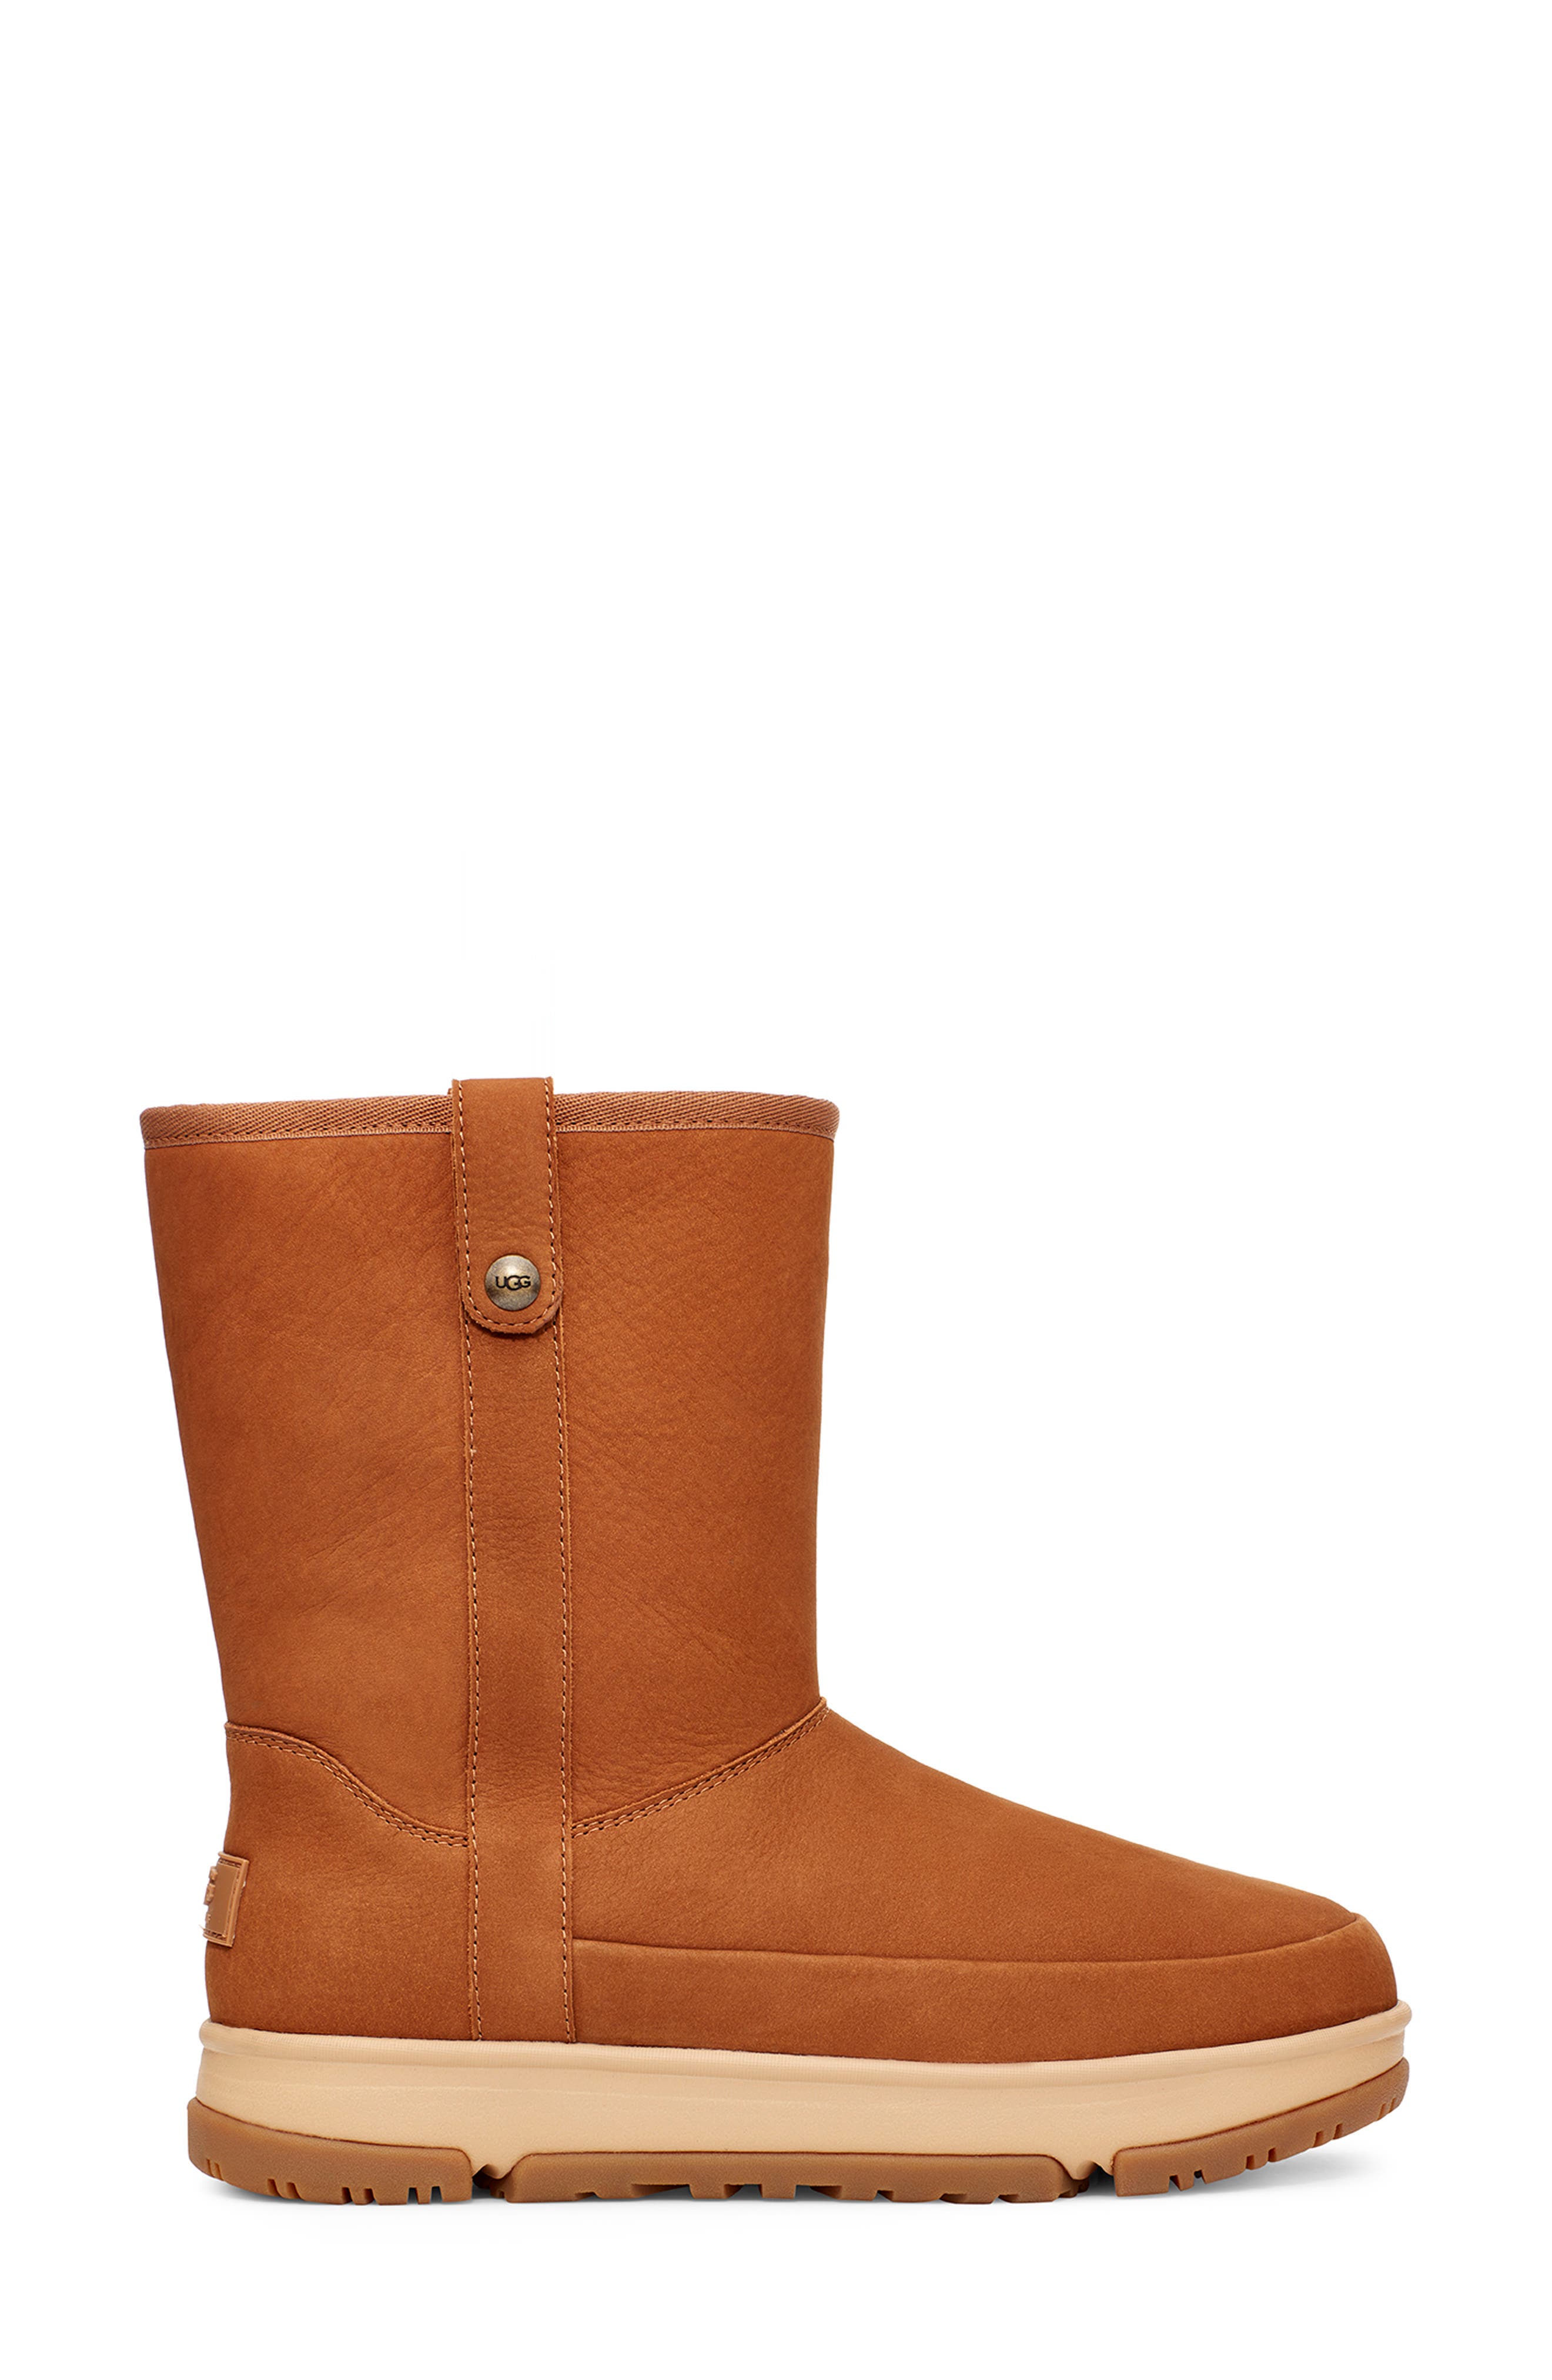 ugg classic weather waterproof leather short boots